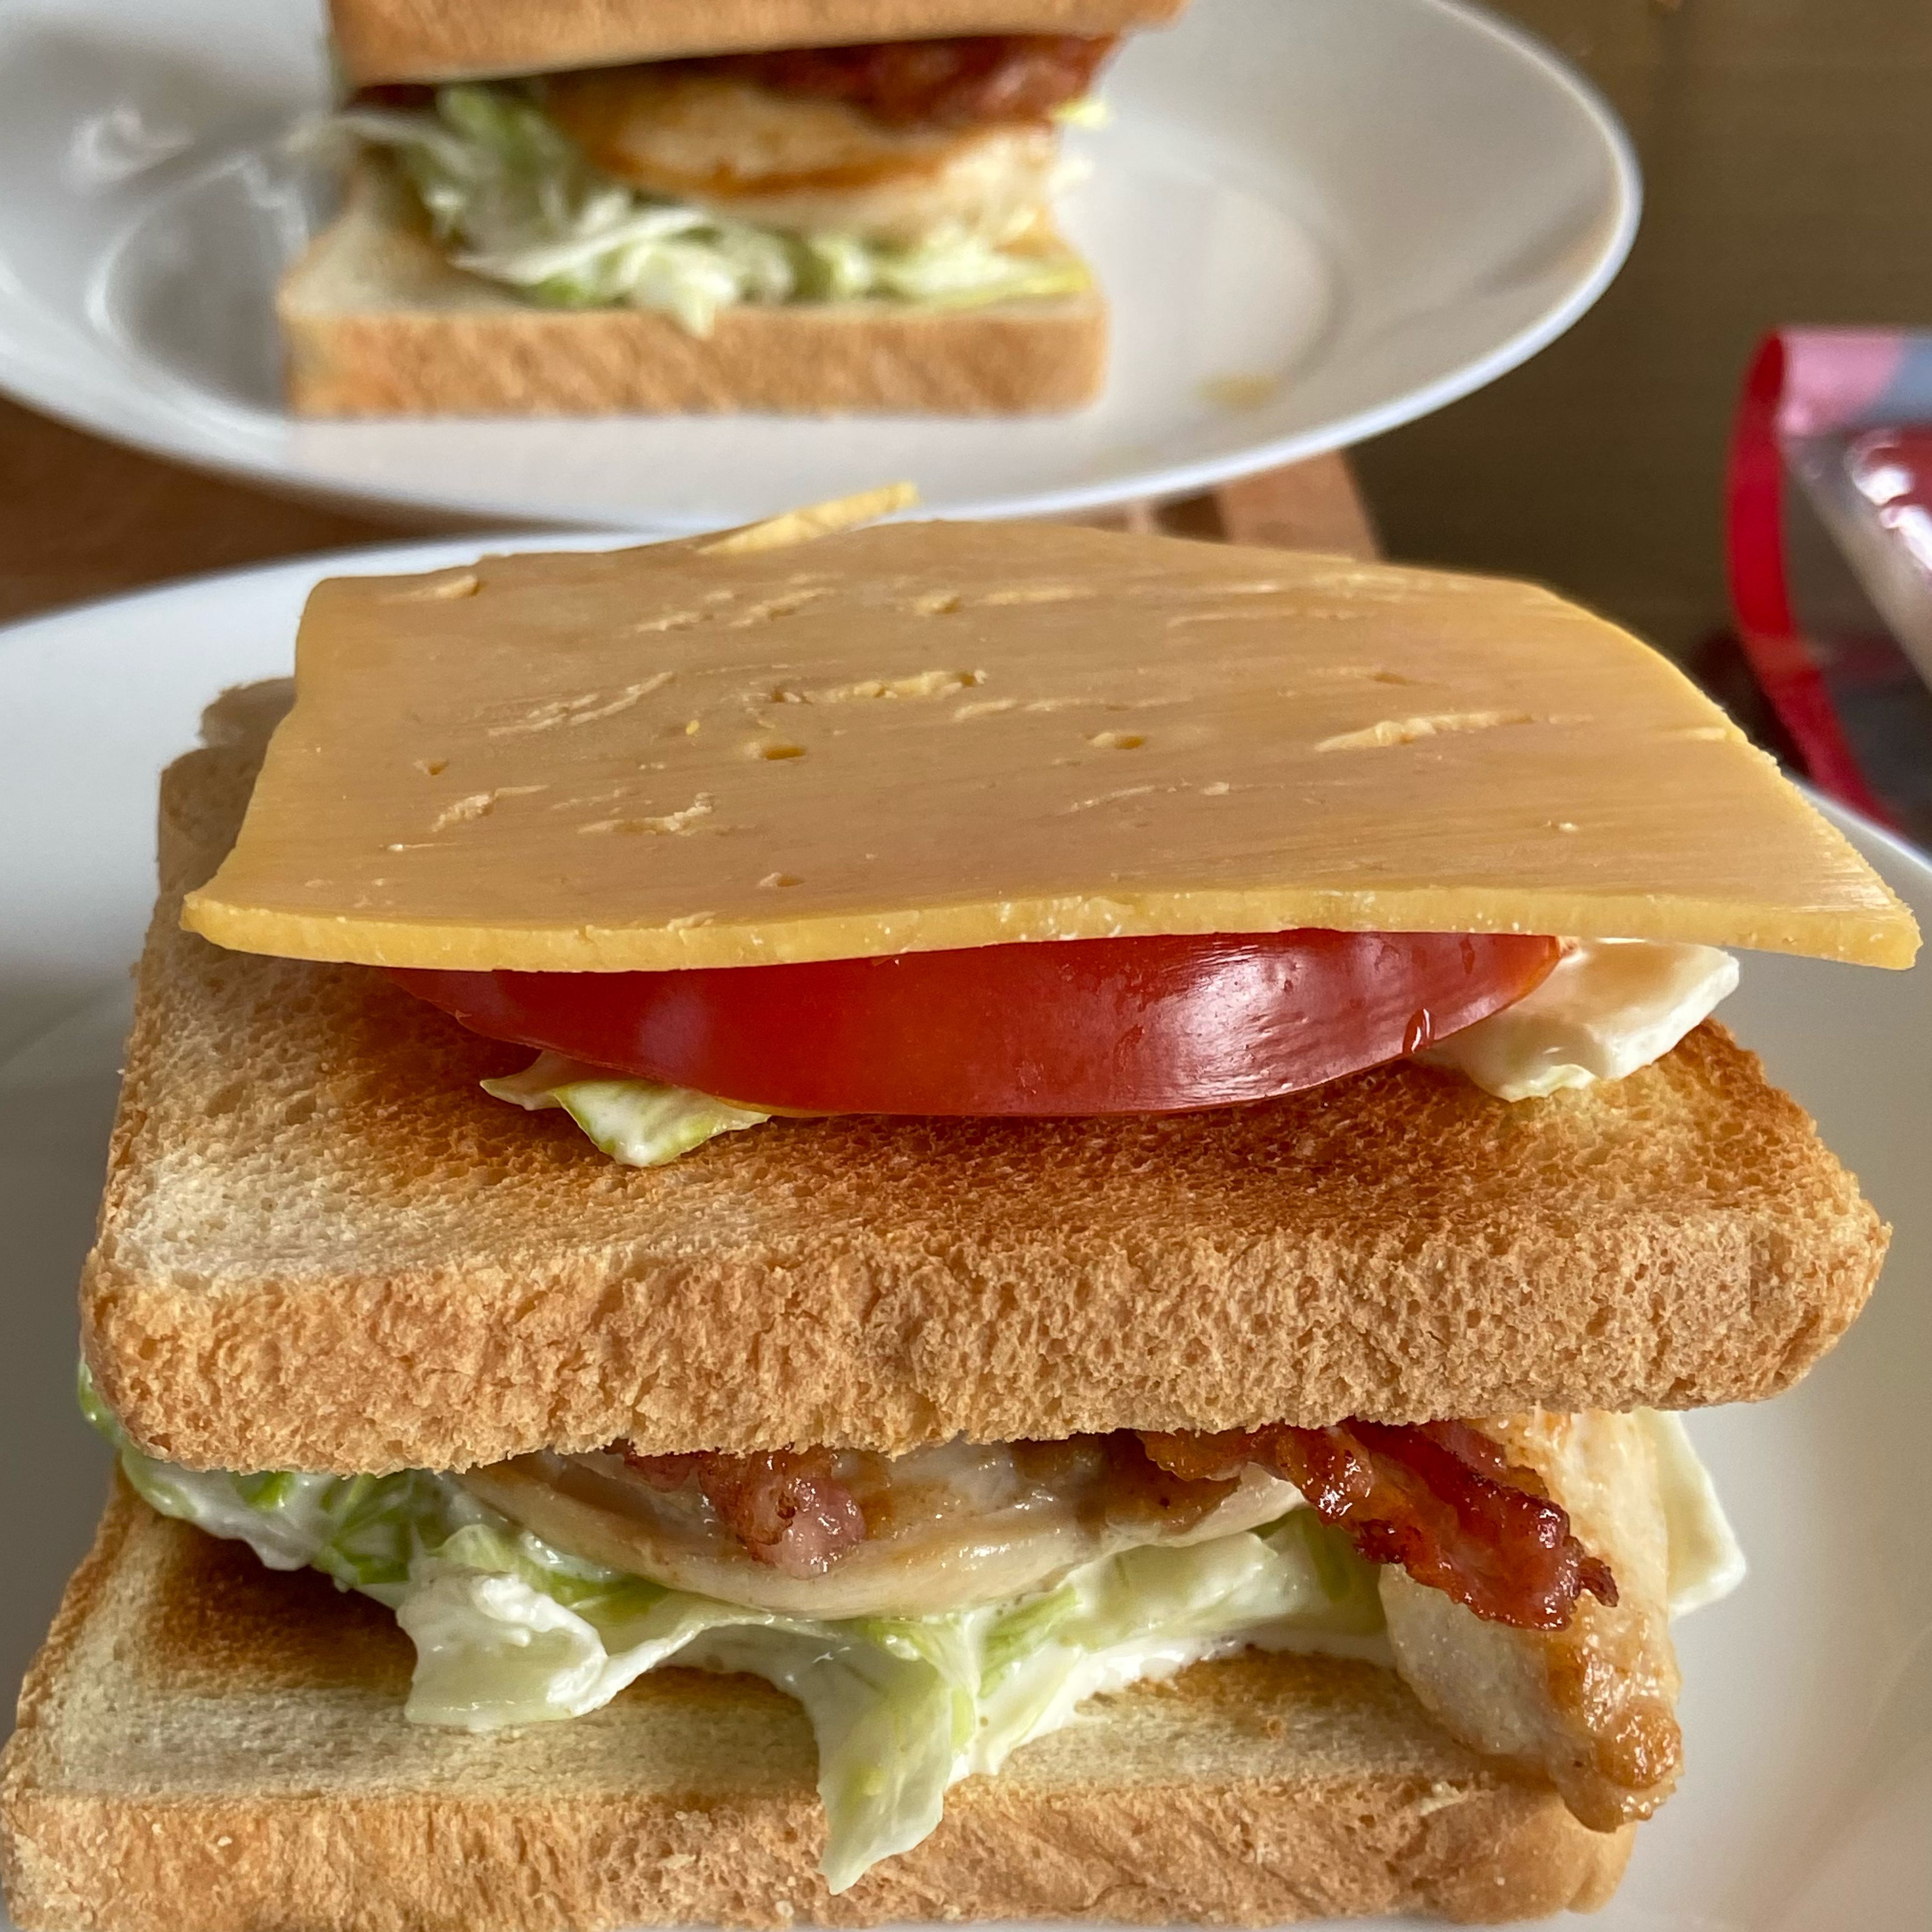 Add another generous portion of lettuce with the sauce on top of the second bread slice, add a tomato slice (or two) and top with a slice of cheddar cheese.